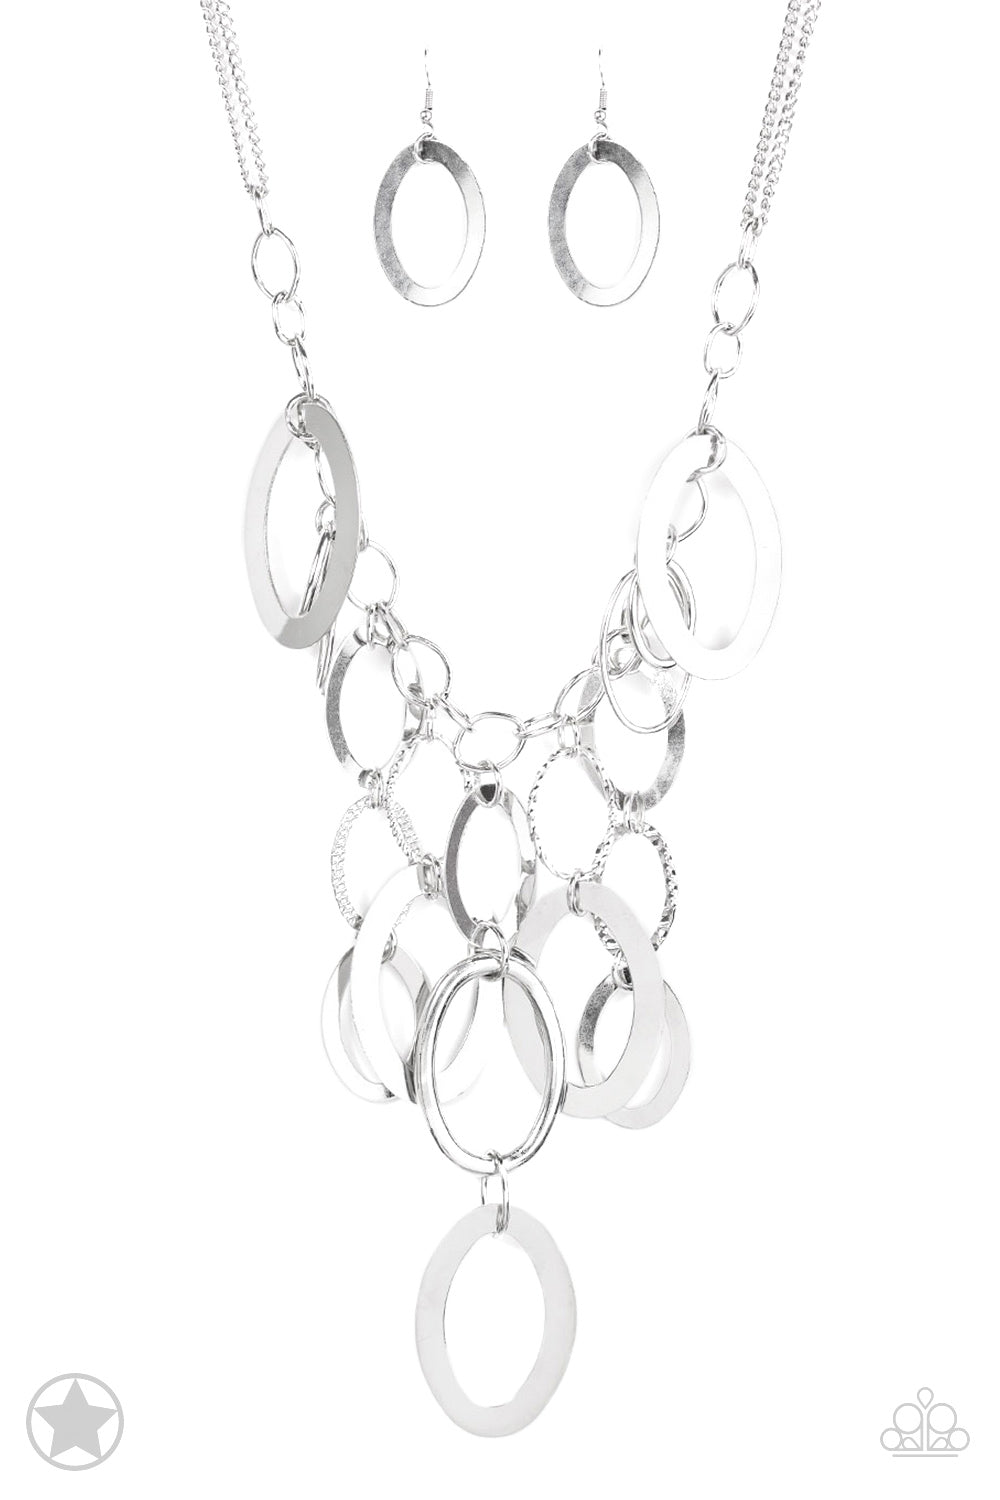 A Silver Spell - Silver Necklace Set